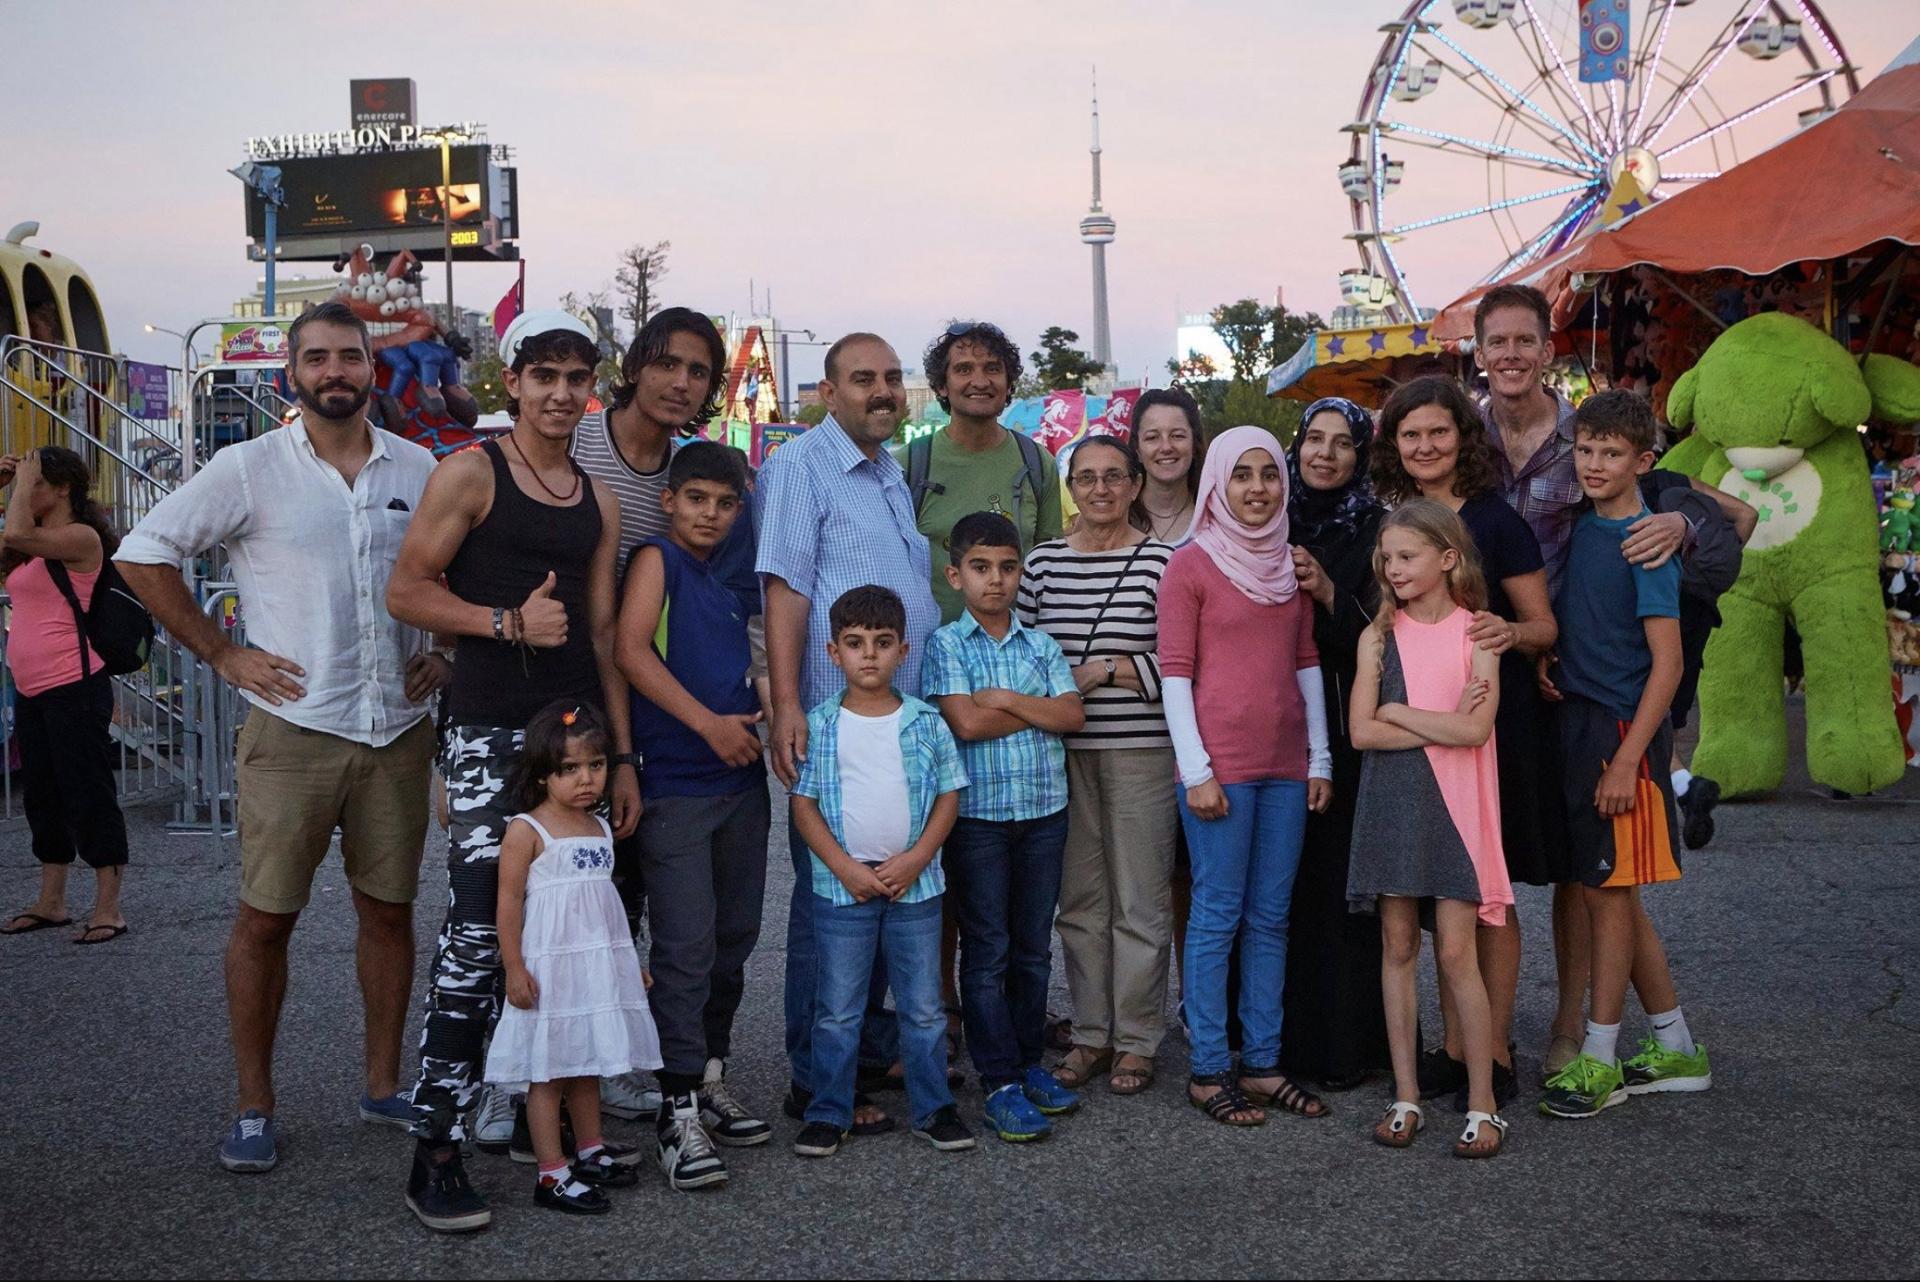 Together Project participants visit Toronto’s Canadian National Exhibition in 2016. (Photo courtesy of the Together Project)